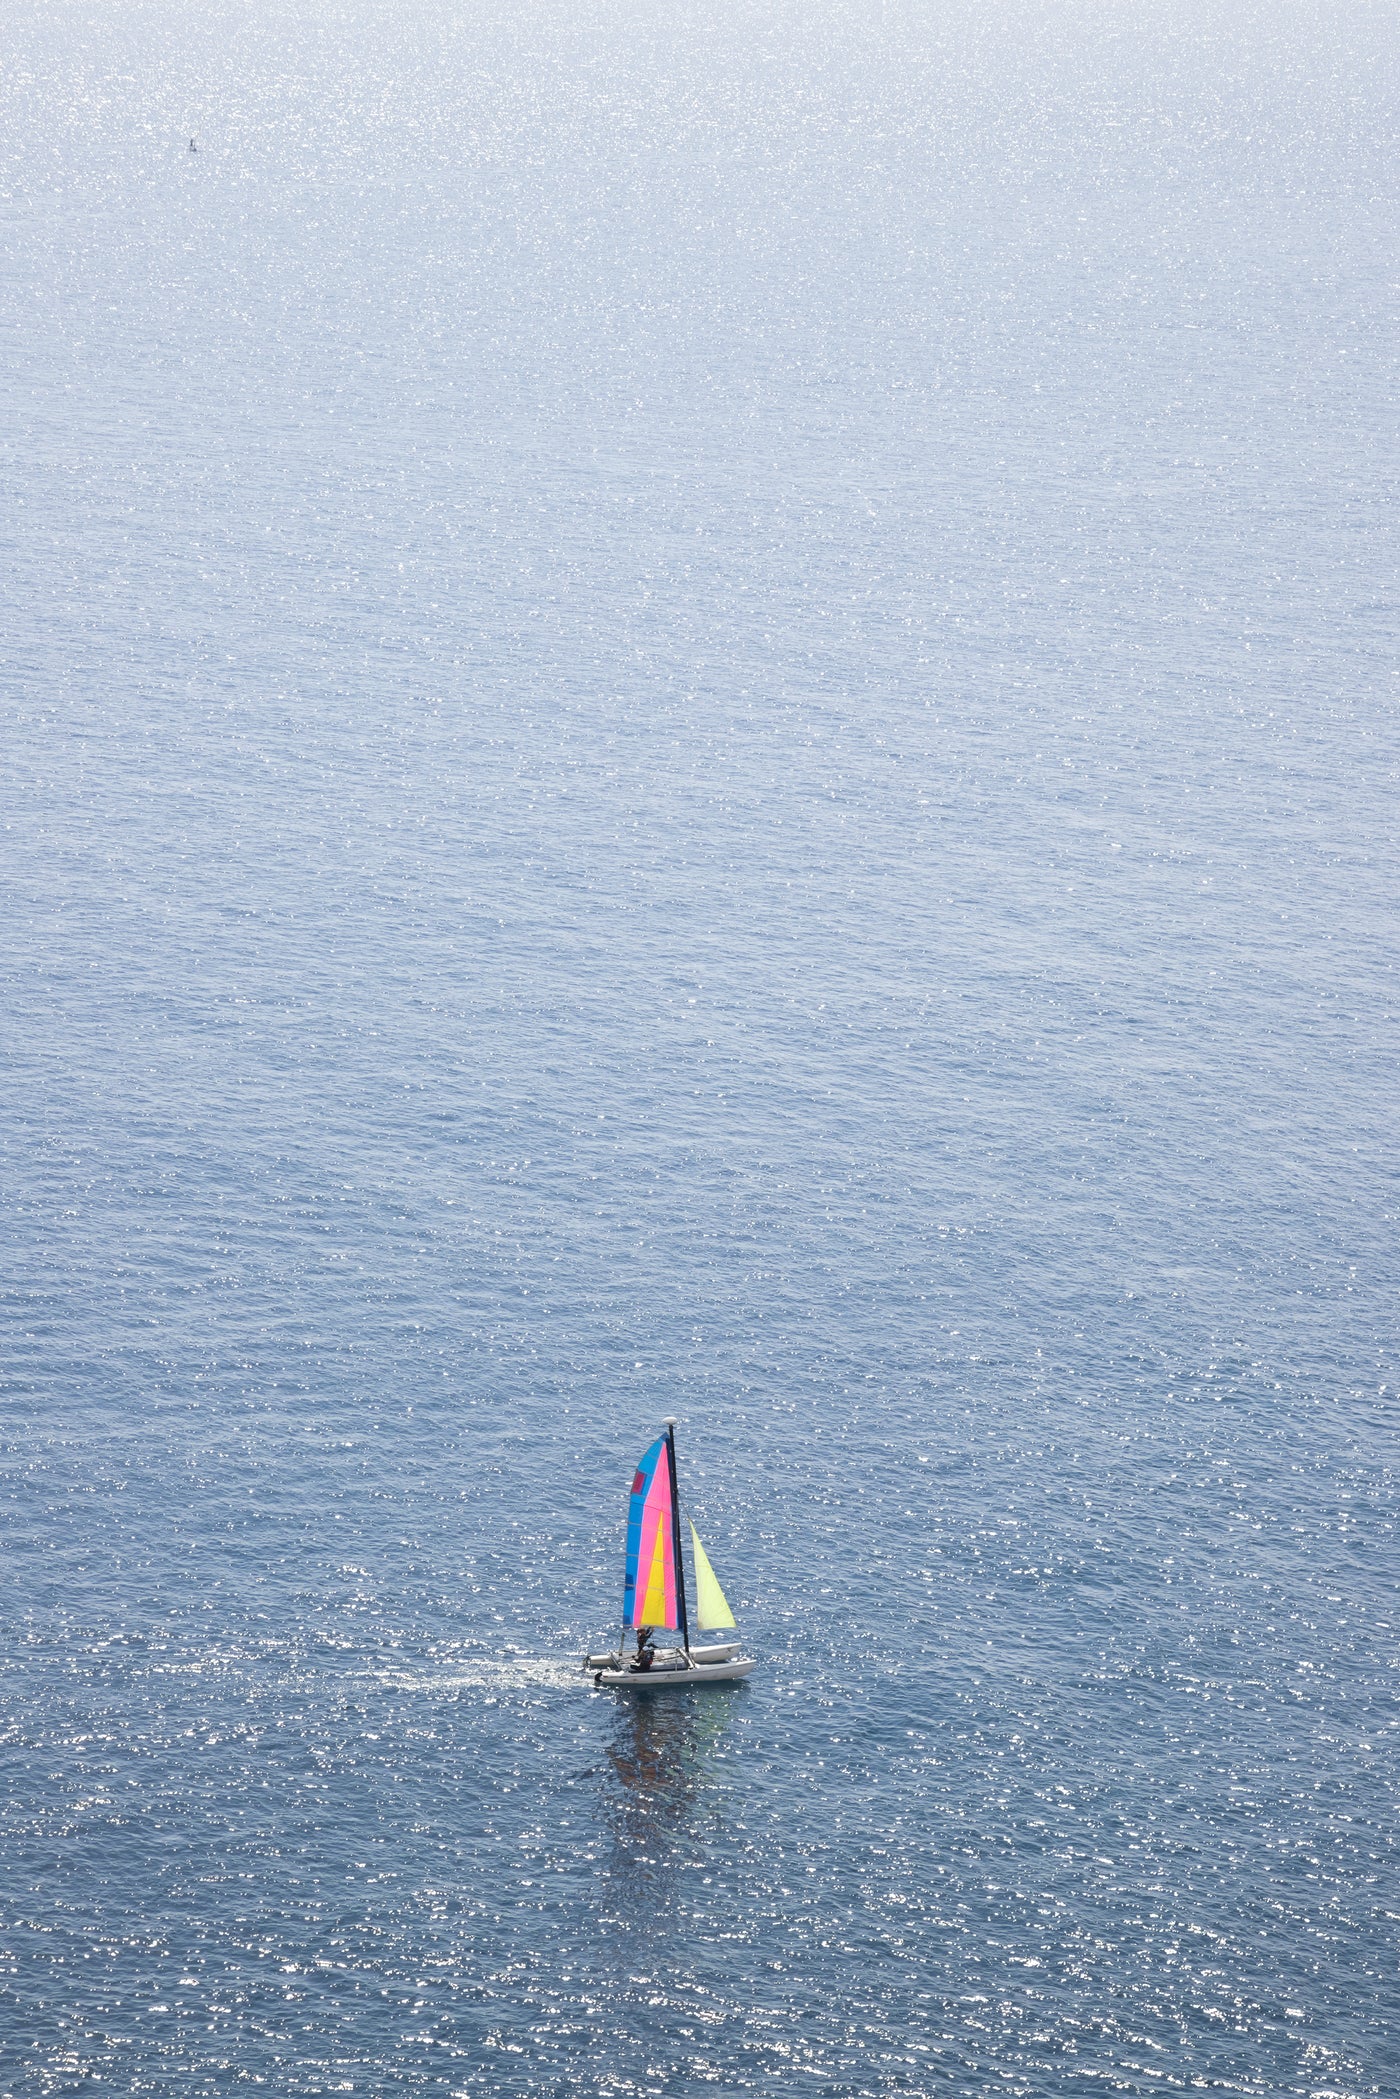 Sailing, Nice, France - Art print by Cattie Coyle Photography